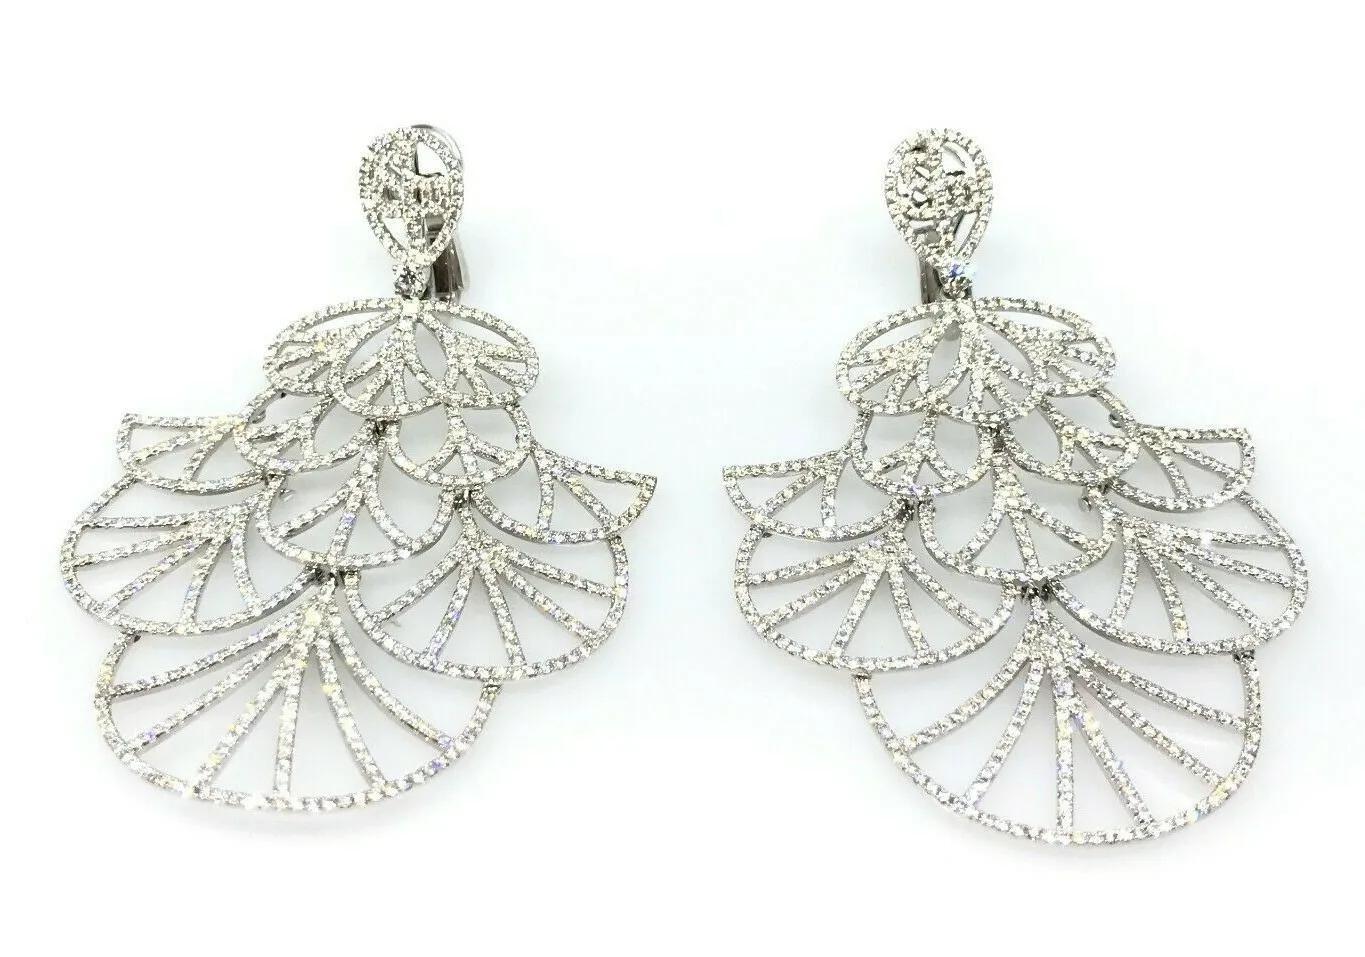 Large Diamond Fan Earrings with 9.50 Carats Total Weight in 18k White Gold

Large Diamond Fan Style Cut-out Earrings feature 9.50 carats of Round Brilliant Diamonds set in a slightly flexible framework of 18k White Gold. The earrings are secured by